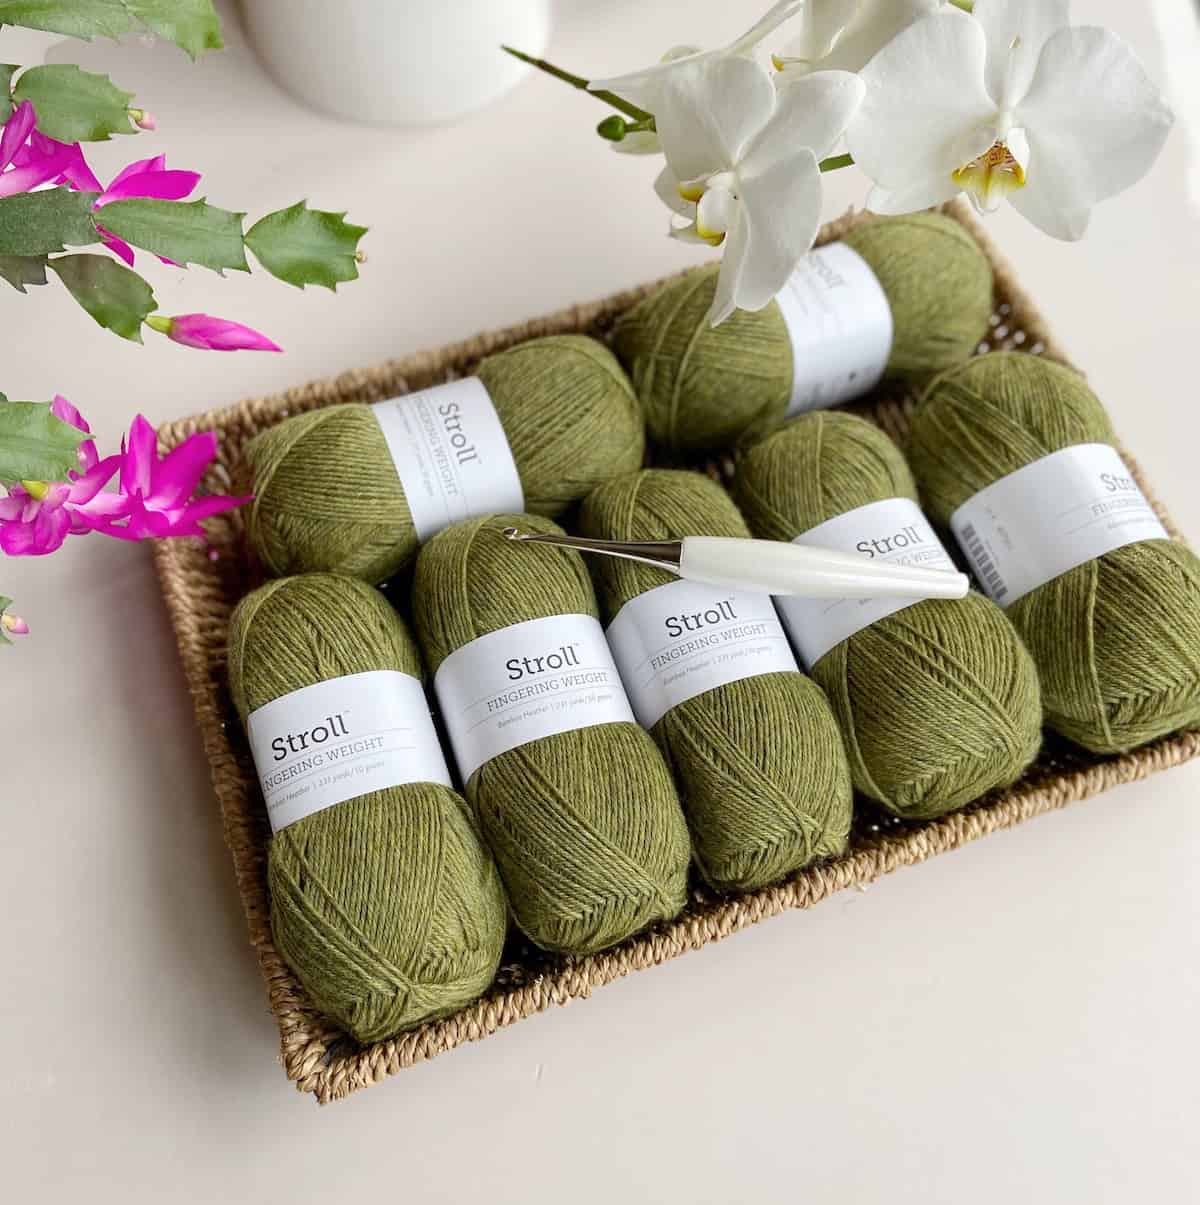 Image showing fingering weight yarn in green with white crochet hook.